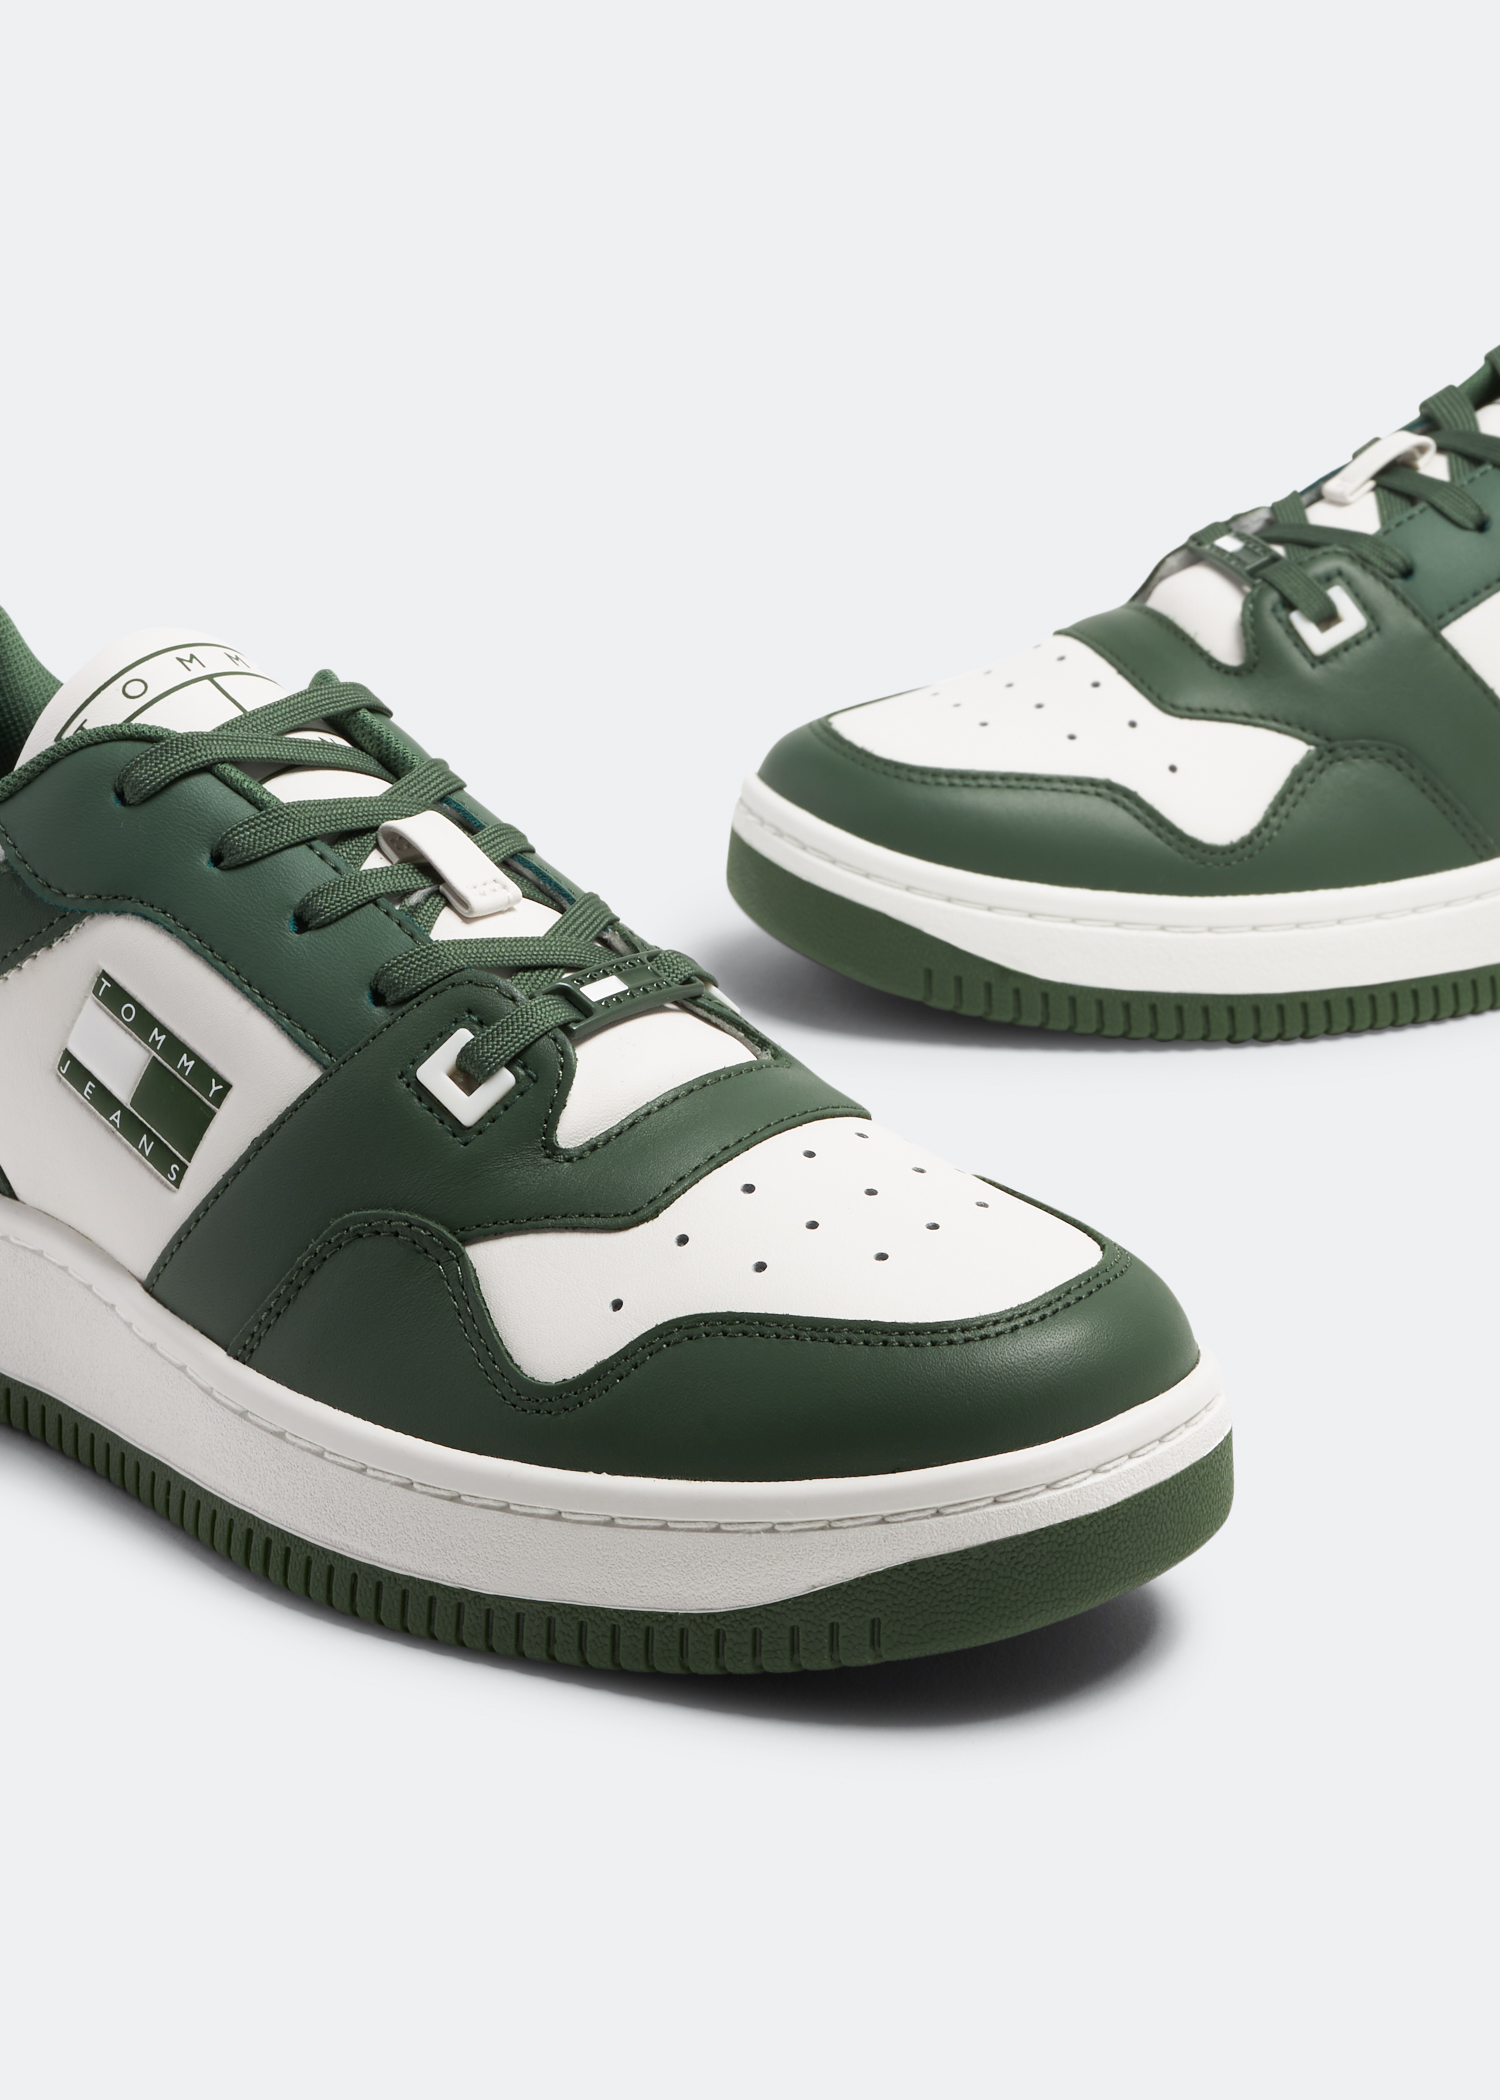 Tommy Hilfiger Basket sneakers for Men - Green in Oman | Level Shoes